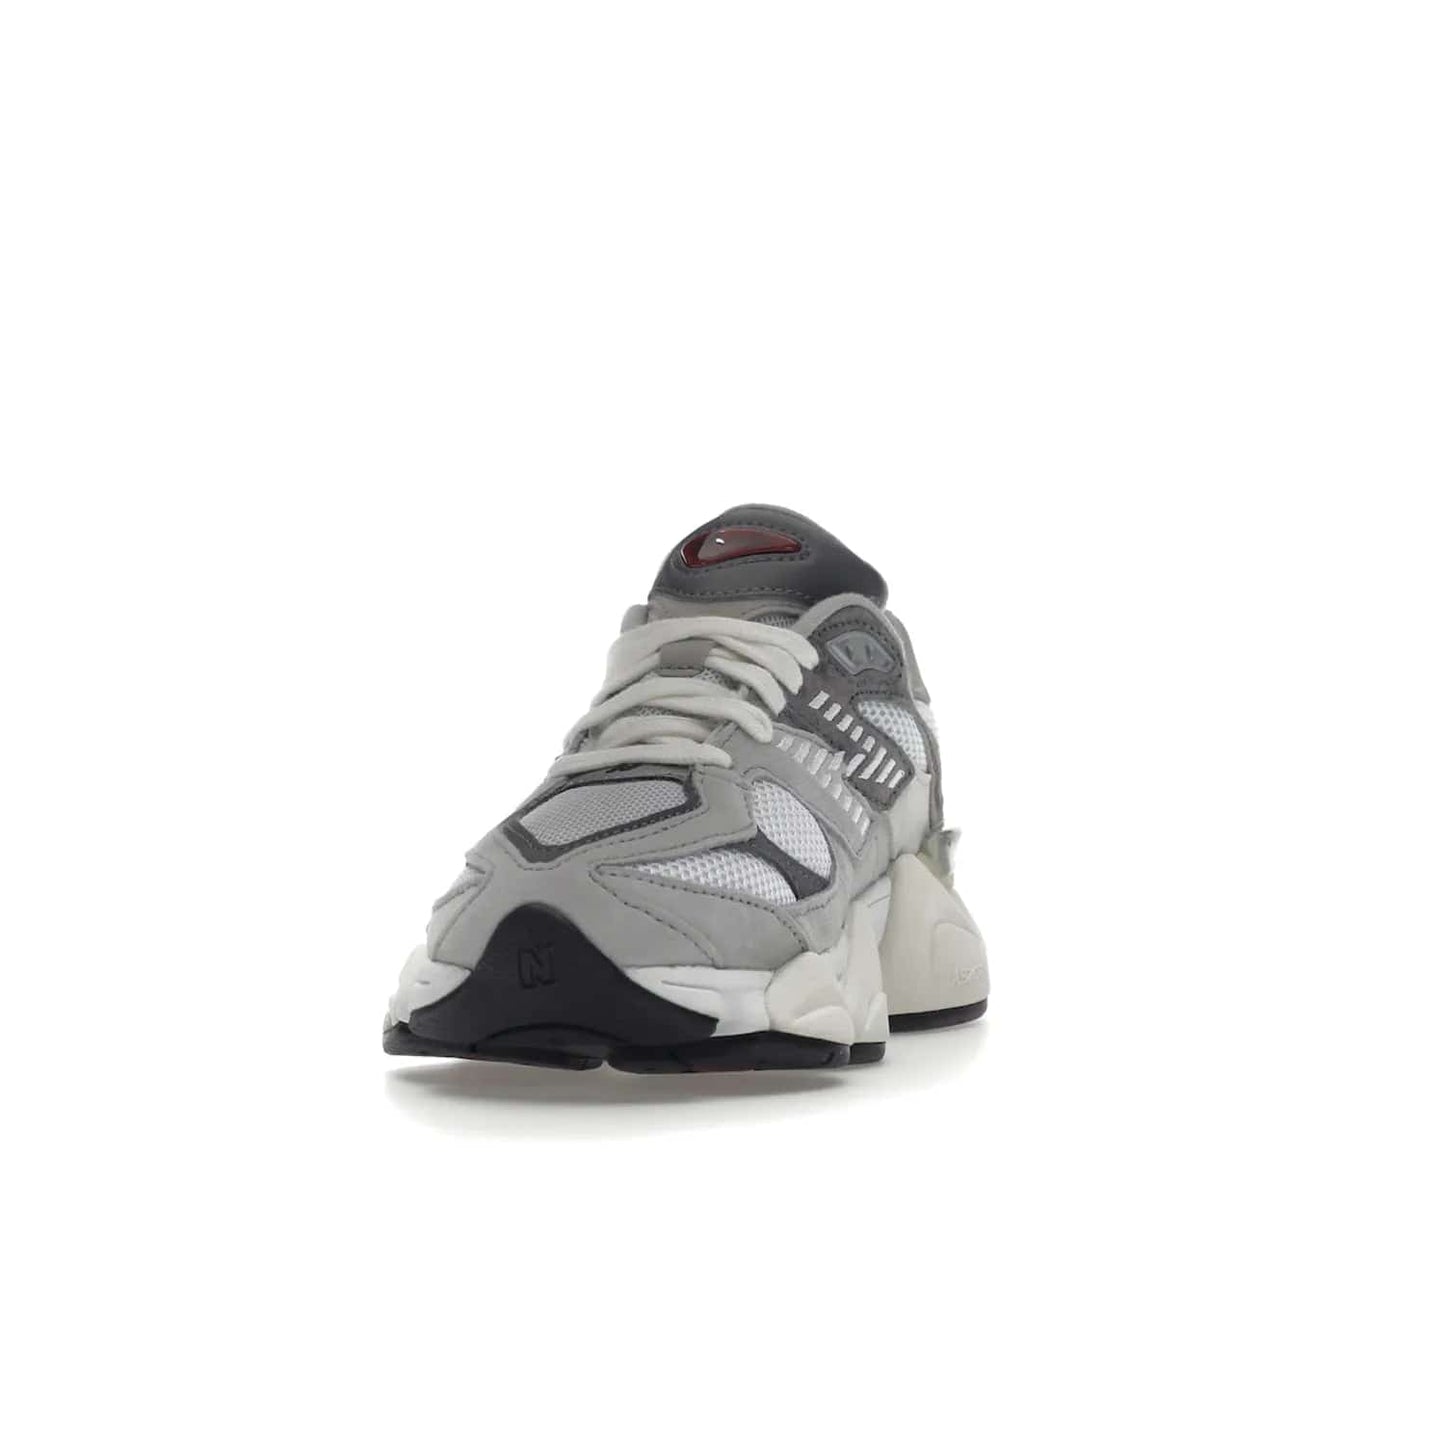 New Balance 9060 Rain Cloud Grey - Image 12 - Only at www.BallersClubKickz.com - New Balance 9060 Rain Cloud Grey is an early 2000s design with grey and off-white tones. Pigskin suede, mesh, and silver accents. "N" emblem and dual-density midsole on diamond outsole. ABZORB technology cushioning. September 2nd release for $150.